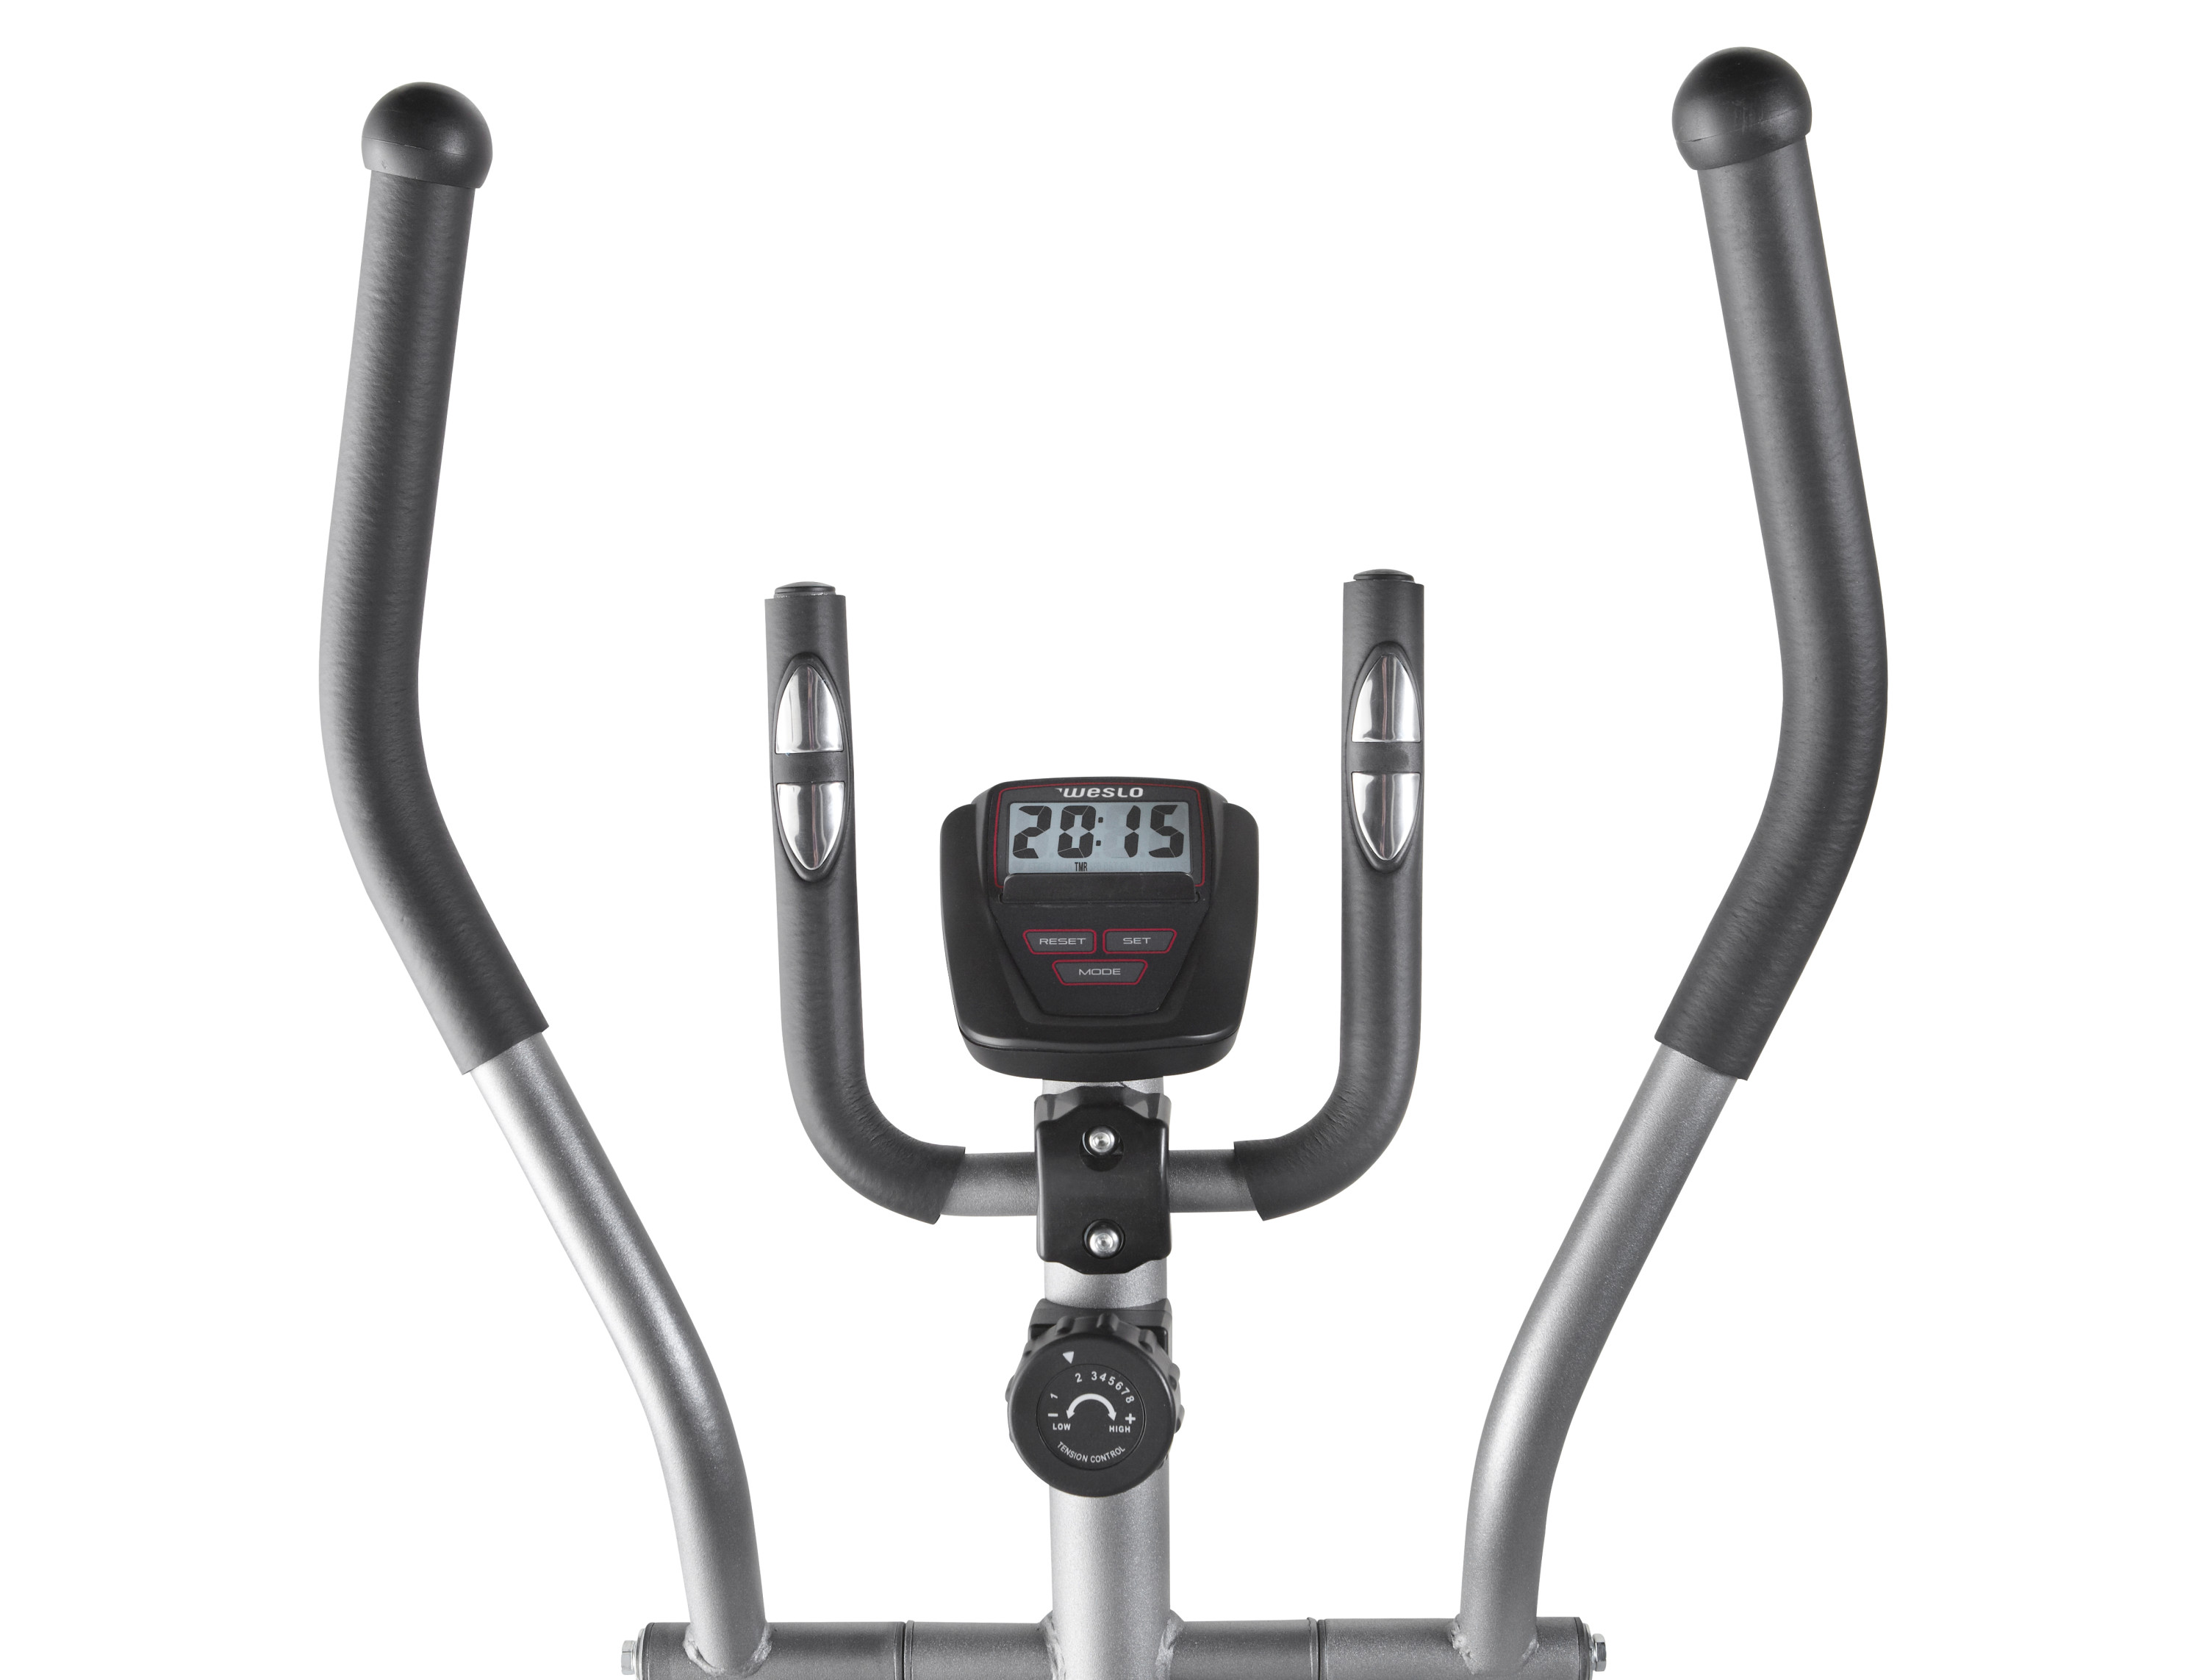 Weslo Momentum G 3.2 Bike and Elliptical Hybrid Trainer with LCD Window Display and 250 lb. Weight Capacity - image 3 of 14